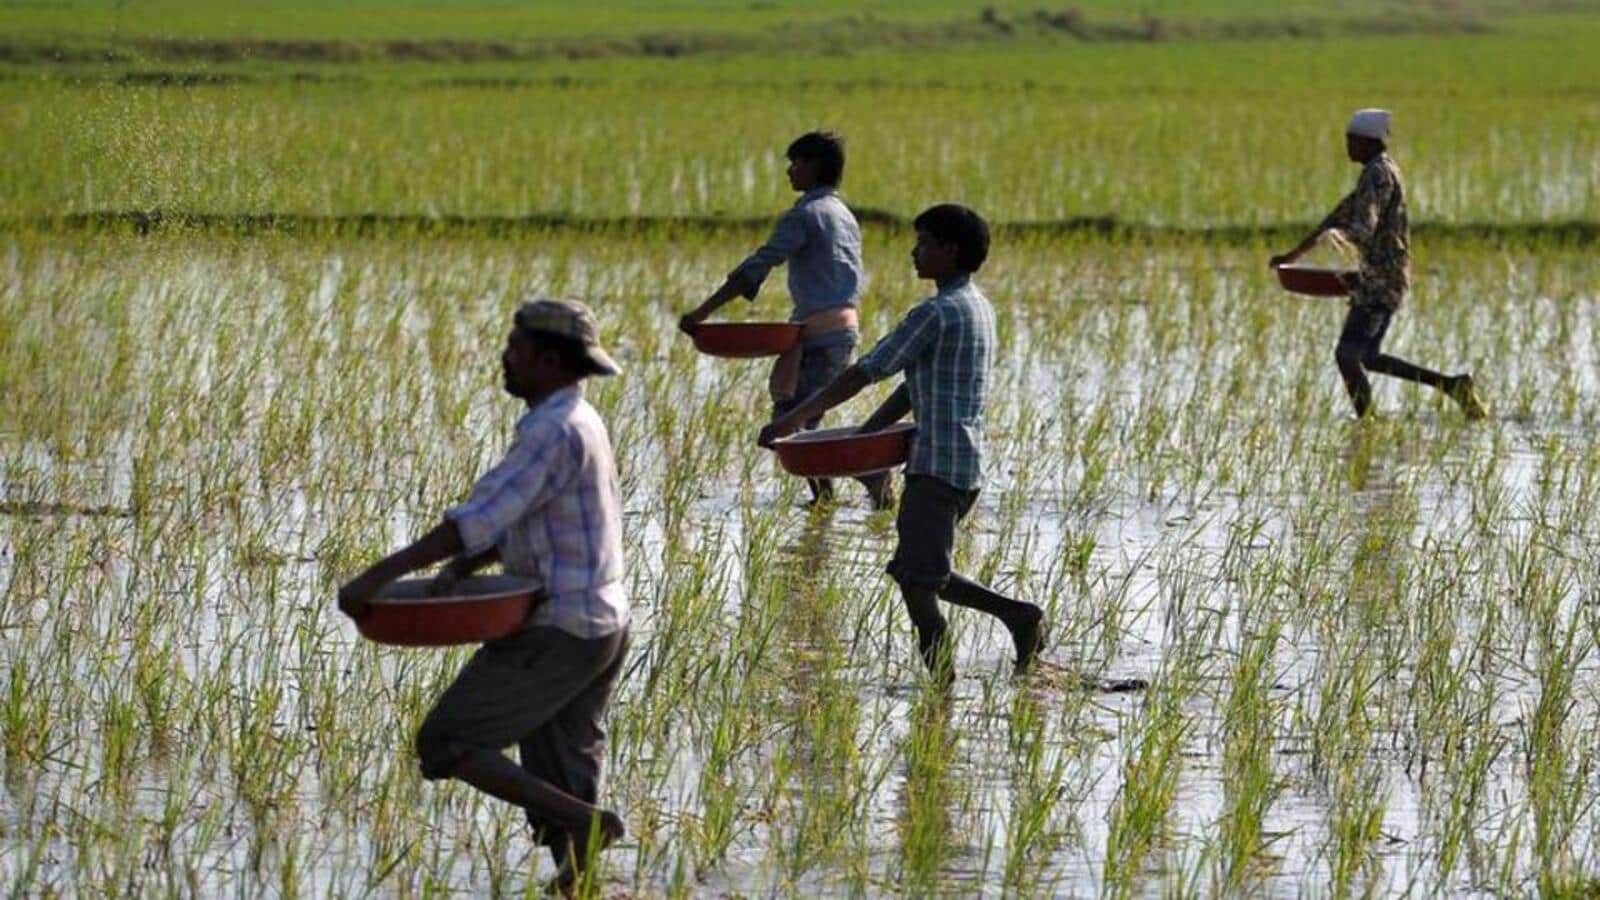 PSPCL promises 8-hour supply to paddy farmers